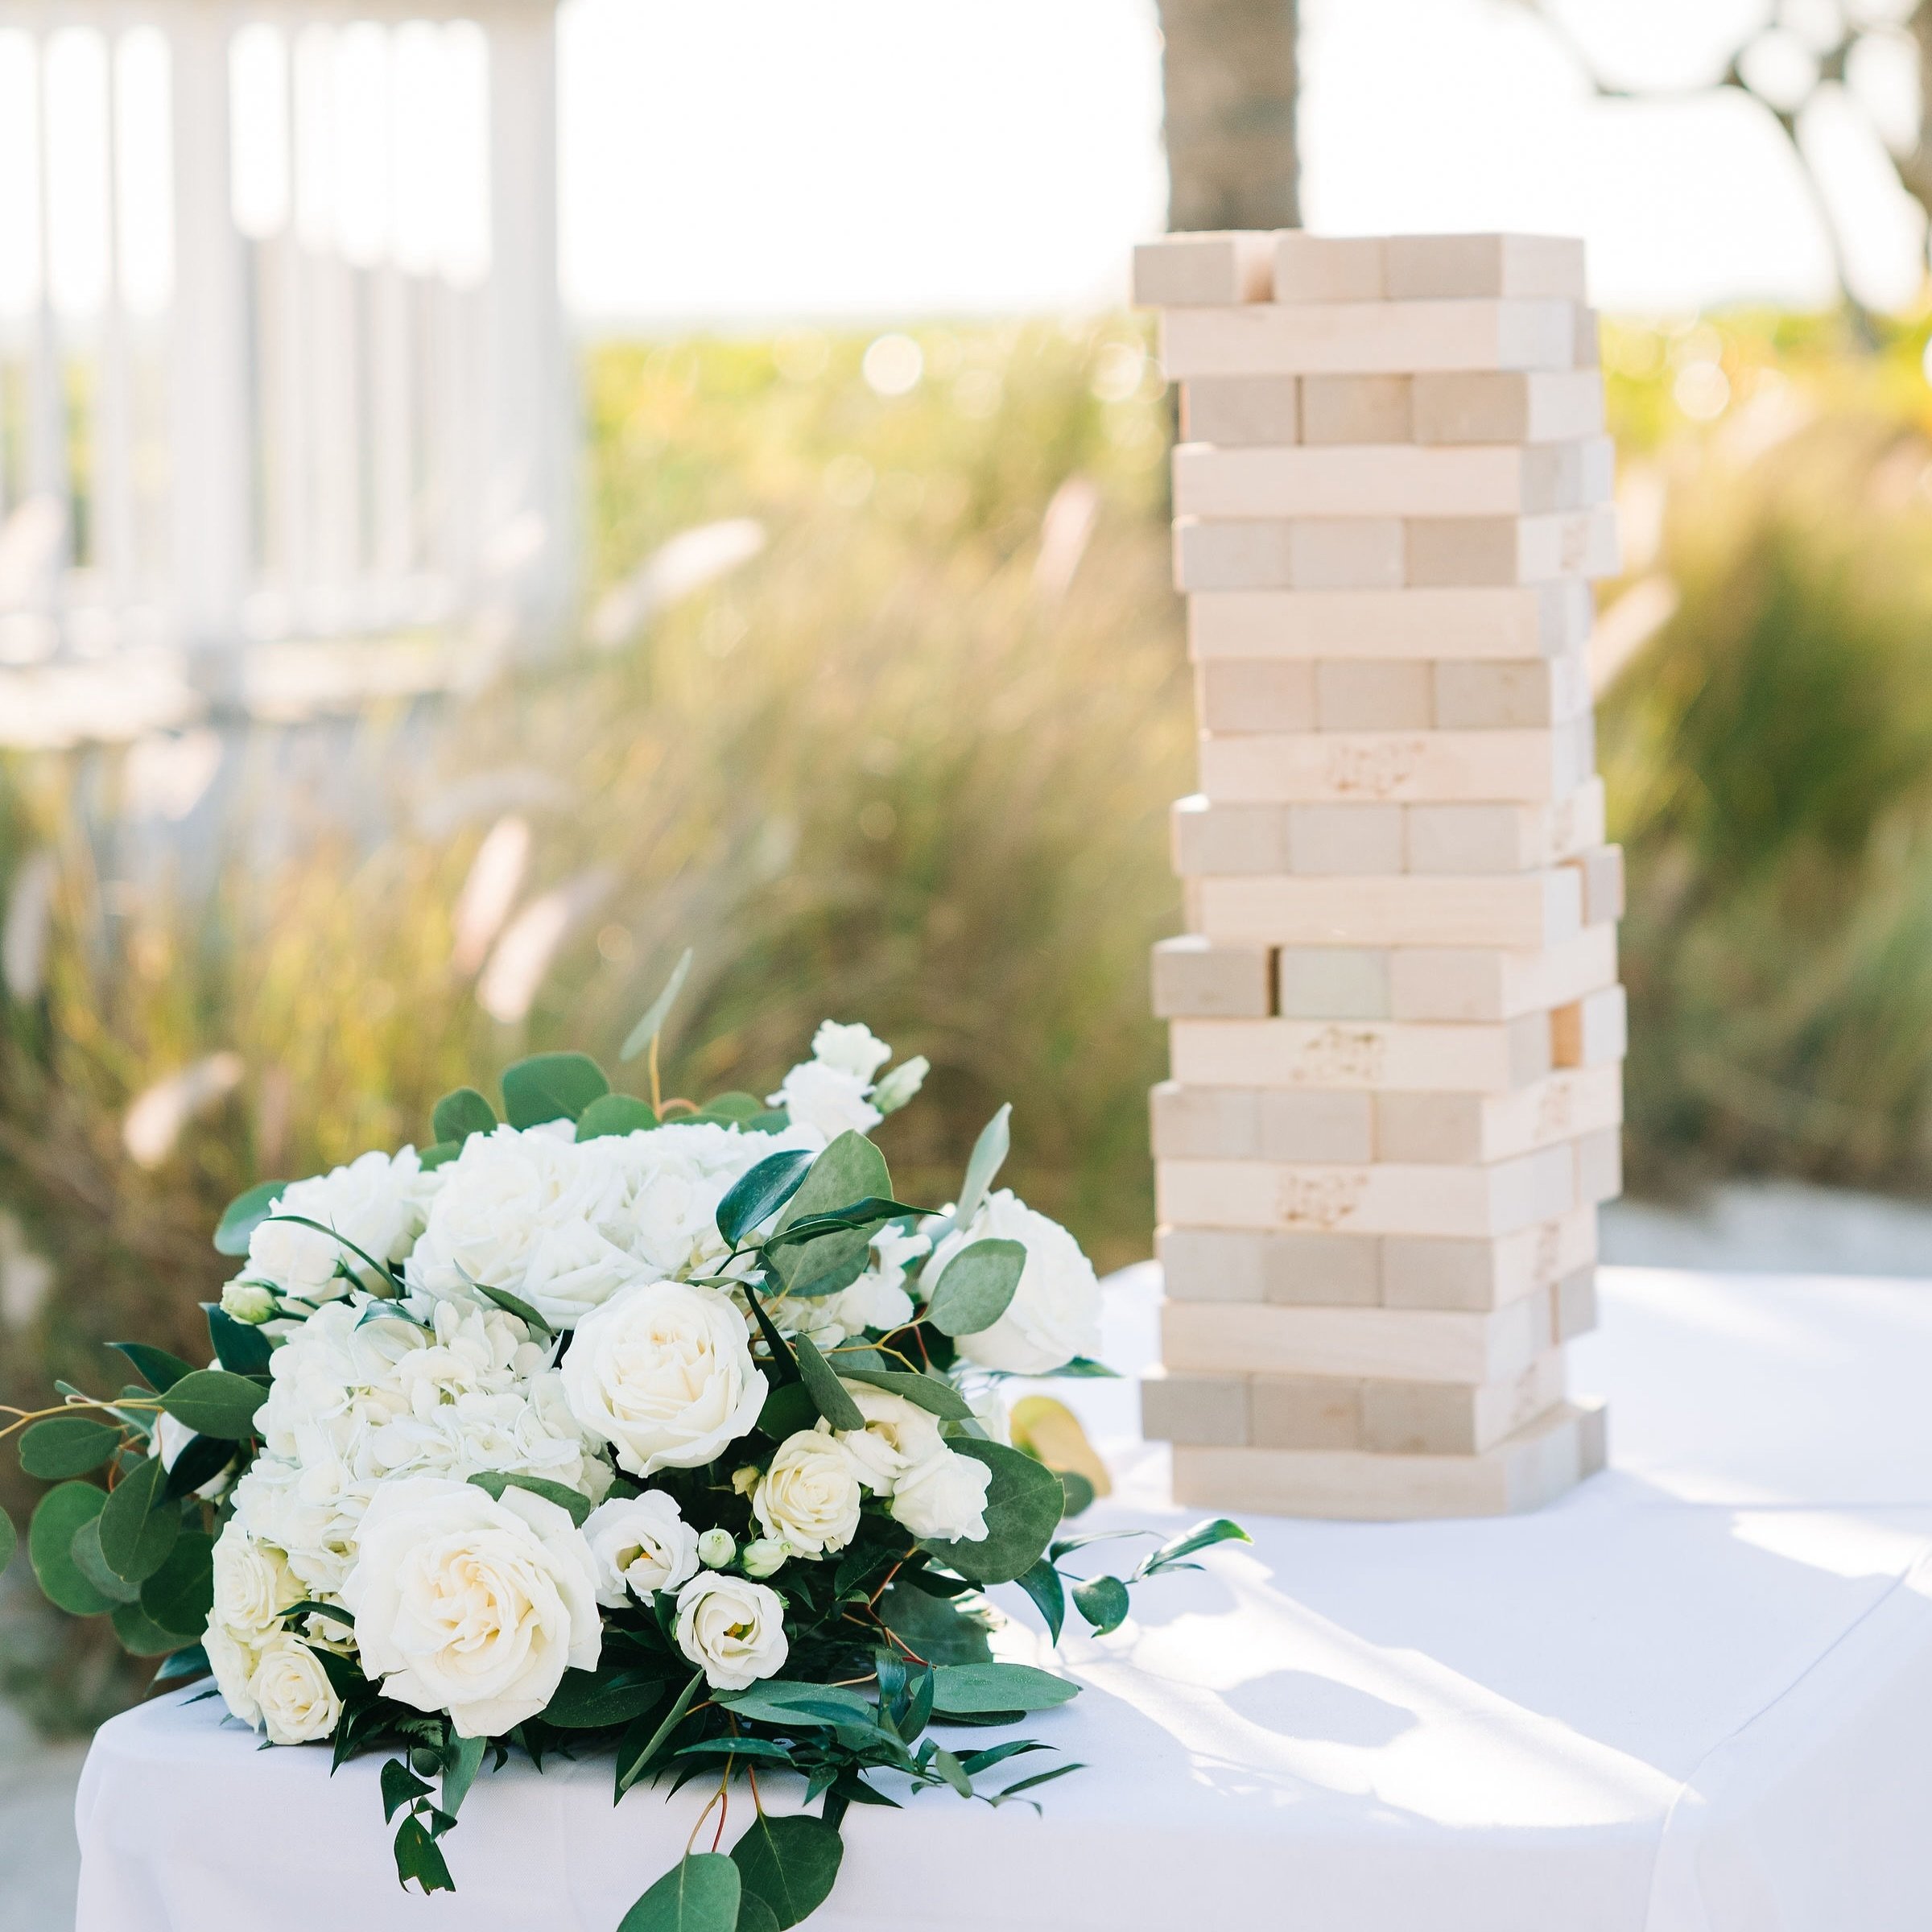 Planning a wedding or event with us? Enhance your guests&rsquo; experience with our fun outdoor games and activities! From Cornhole and Connect Four to Jenga, we have it all. Contact our team today to learn more and make your event unforgettable!

📸